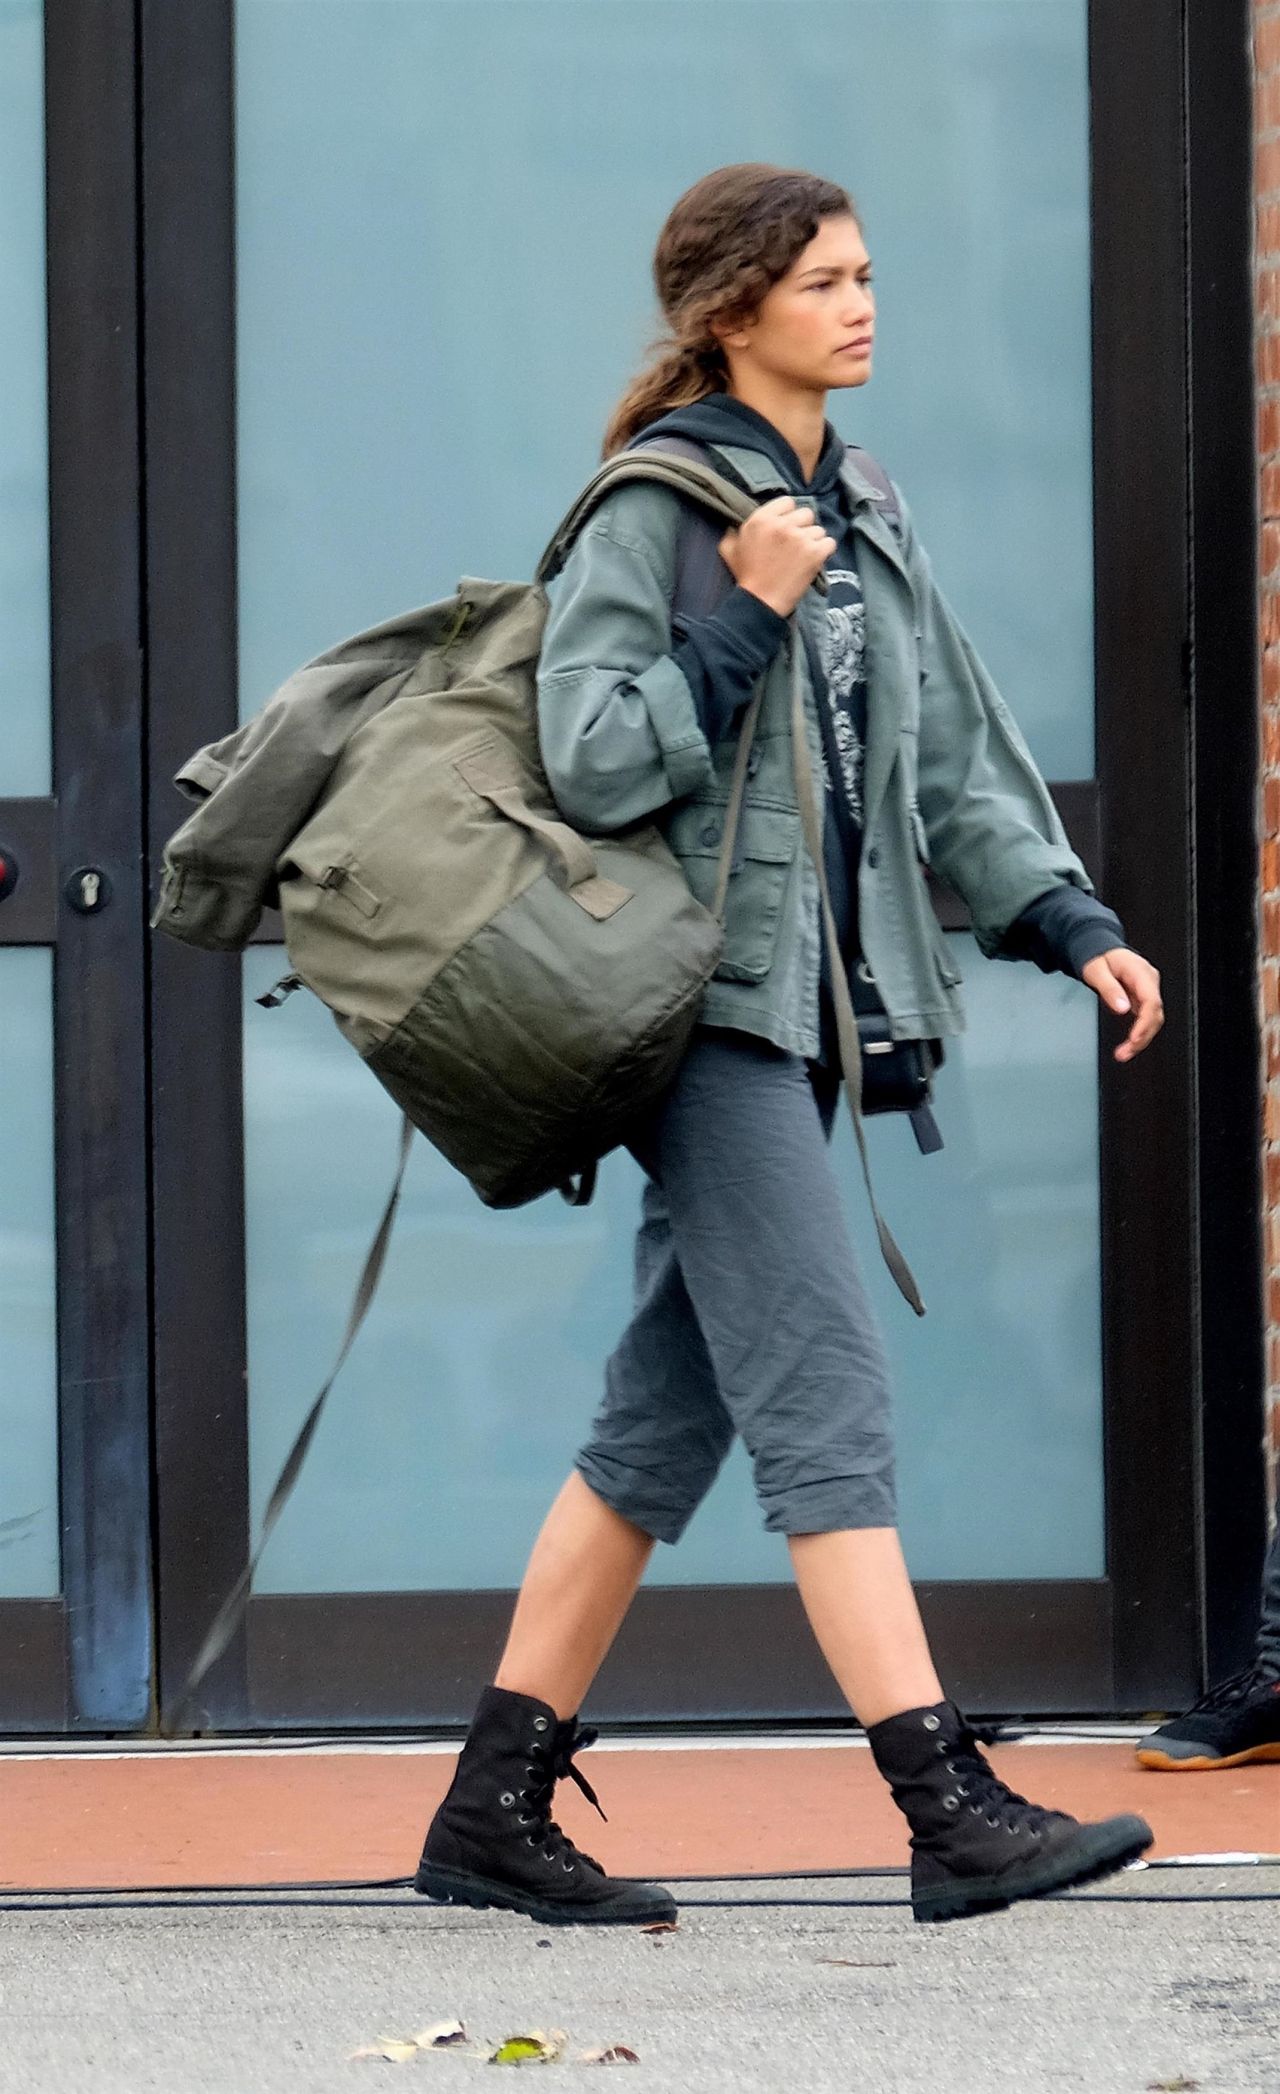 Zendaya - On the Set of "Spider-Man: Far From Home" in ...